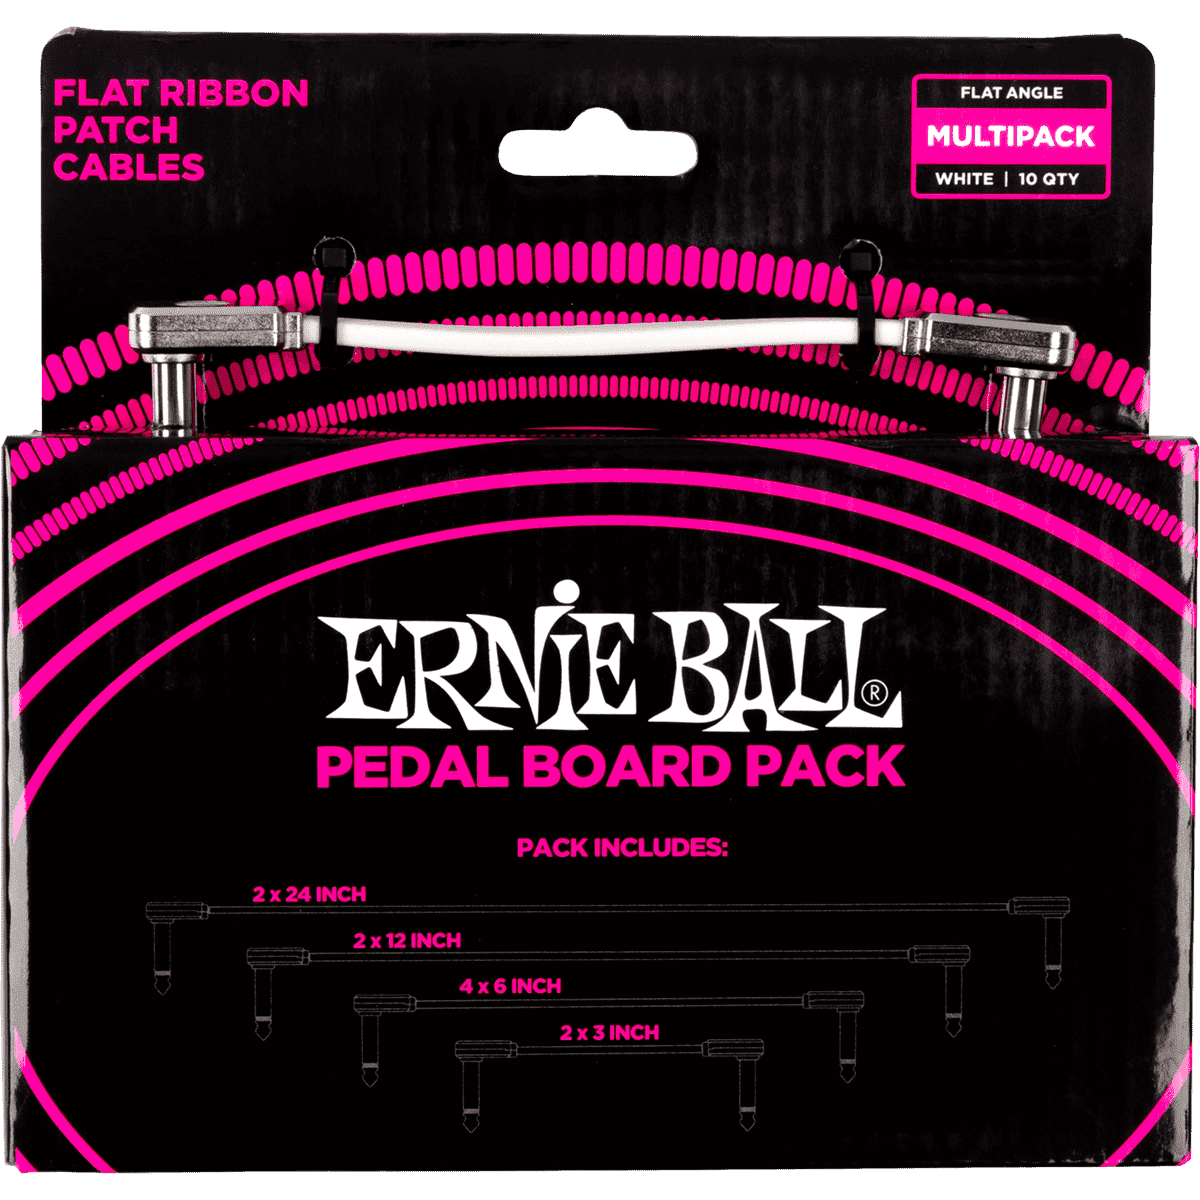 Ernie Ball 6387 Patch cable 10 pieces white